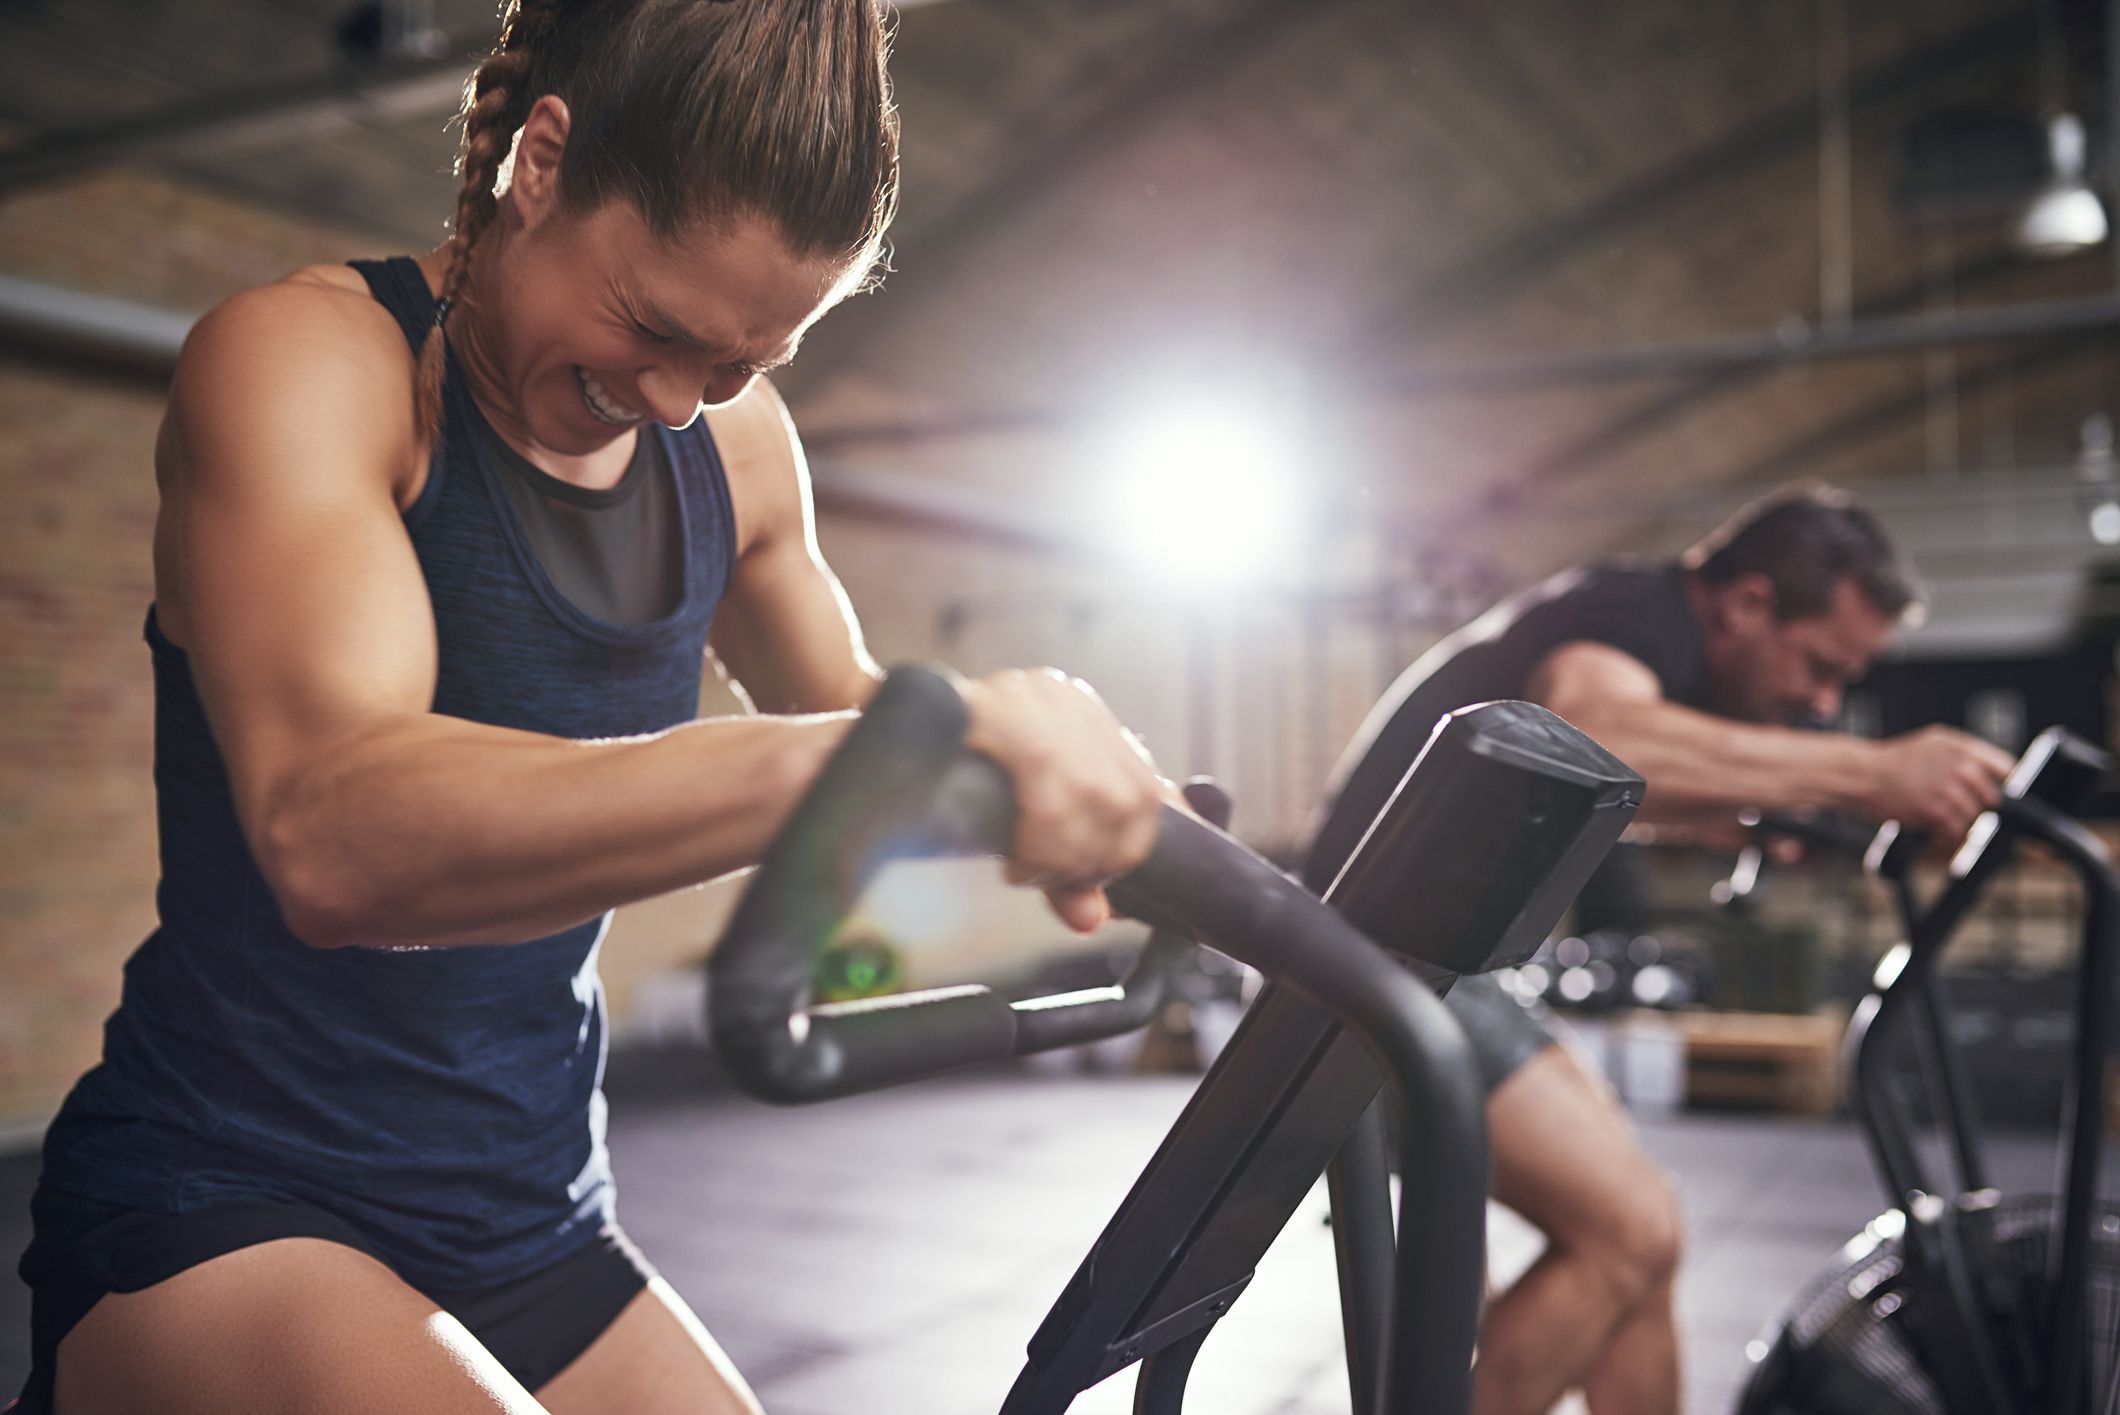 HIIT indoor cycling workout: Over/under threshold intervals to improve  endurance